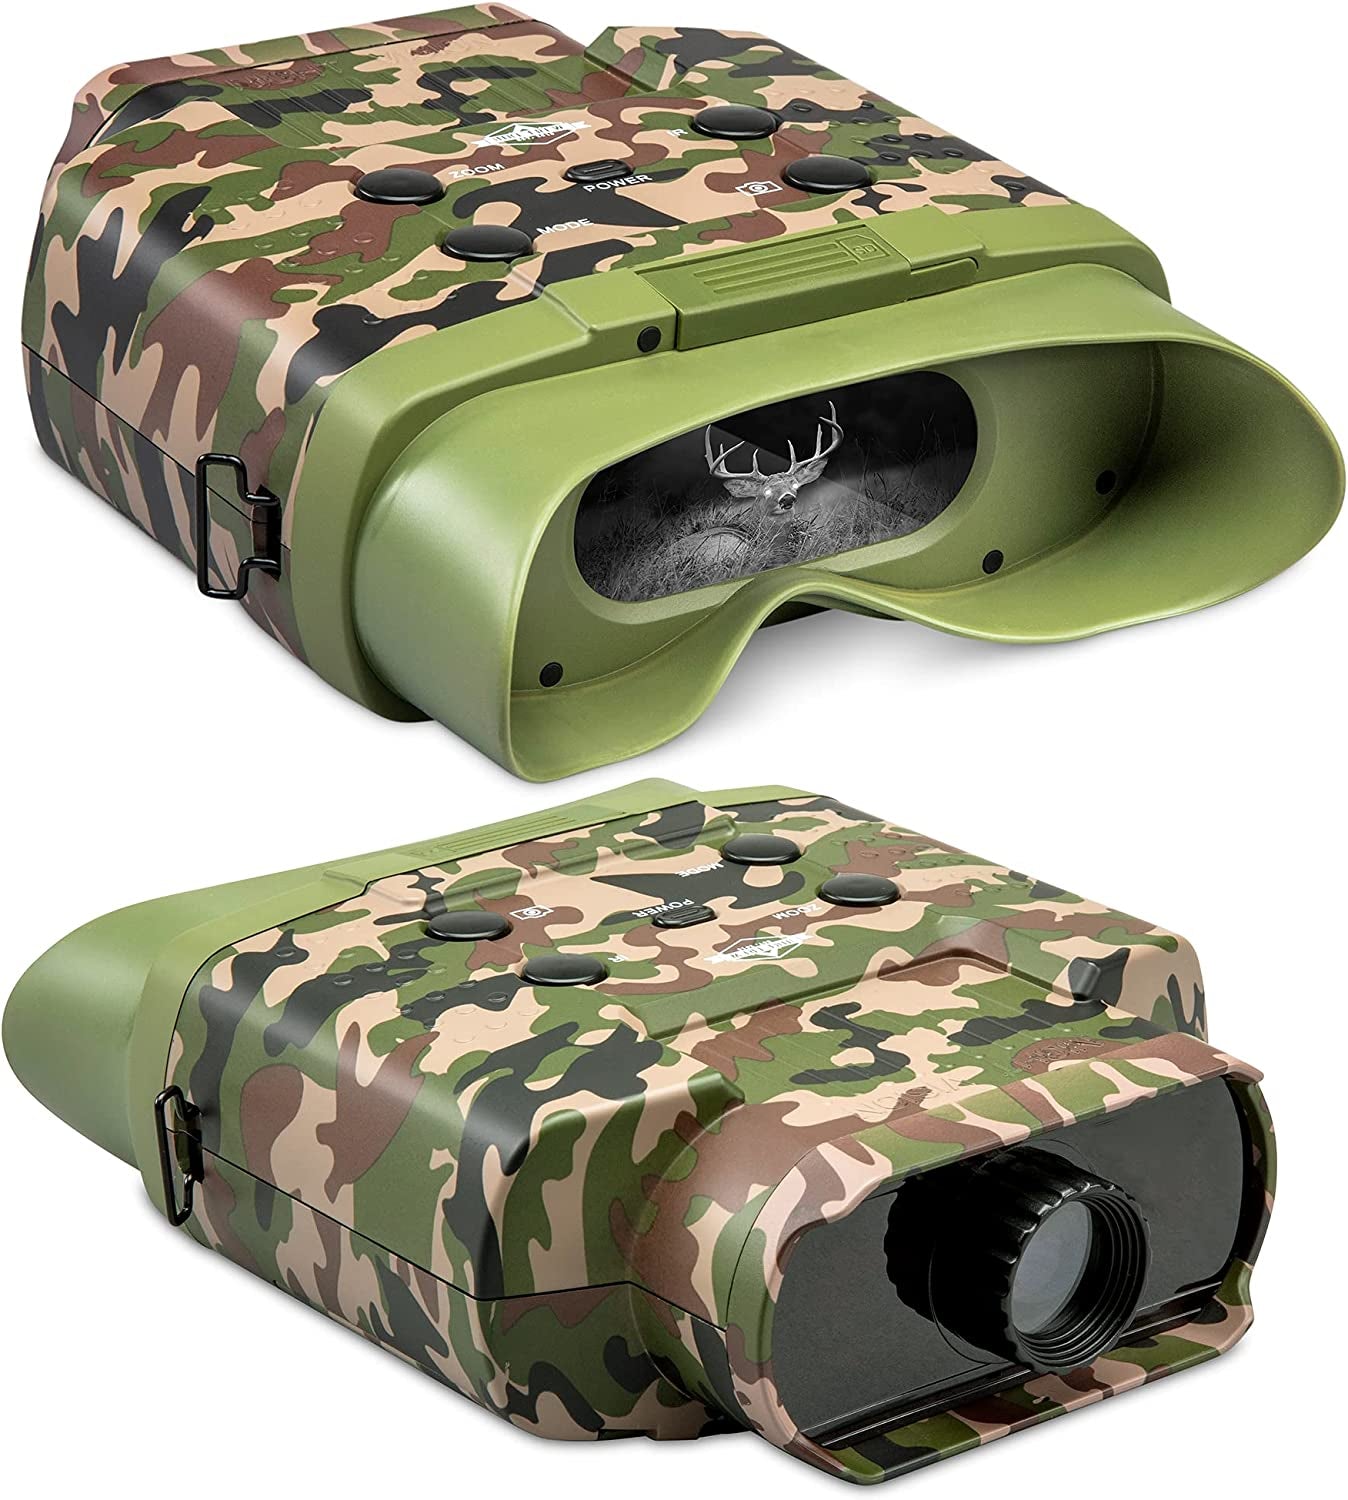 Camouflage Digital Night Vision Binoculars, Capture HD Photos & Videos, See Clear in 100% Total Darkness, Long Viewing Distance, Large Viewing LCD Screen, Infrared Goggles for Hunting